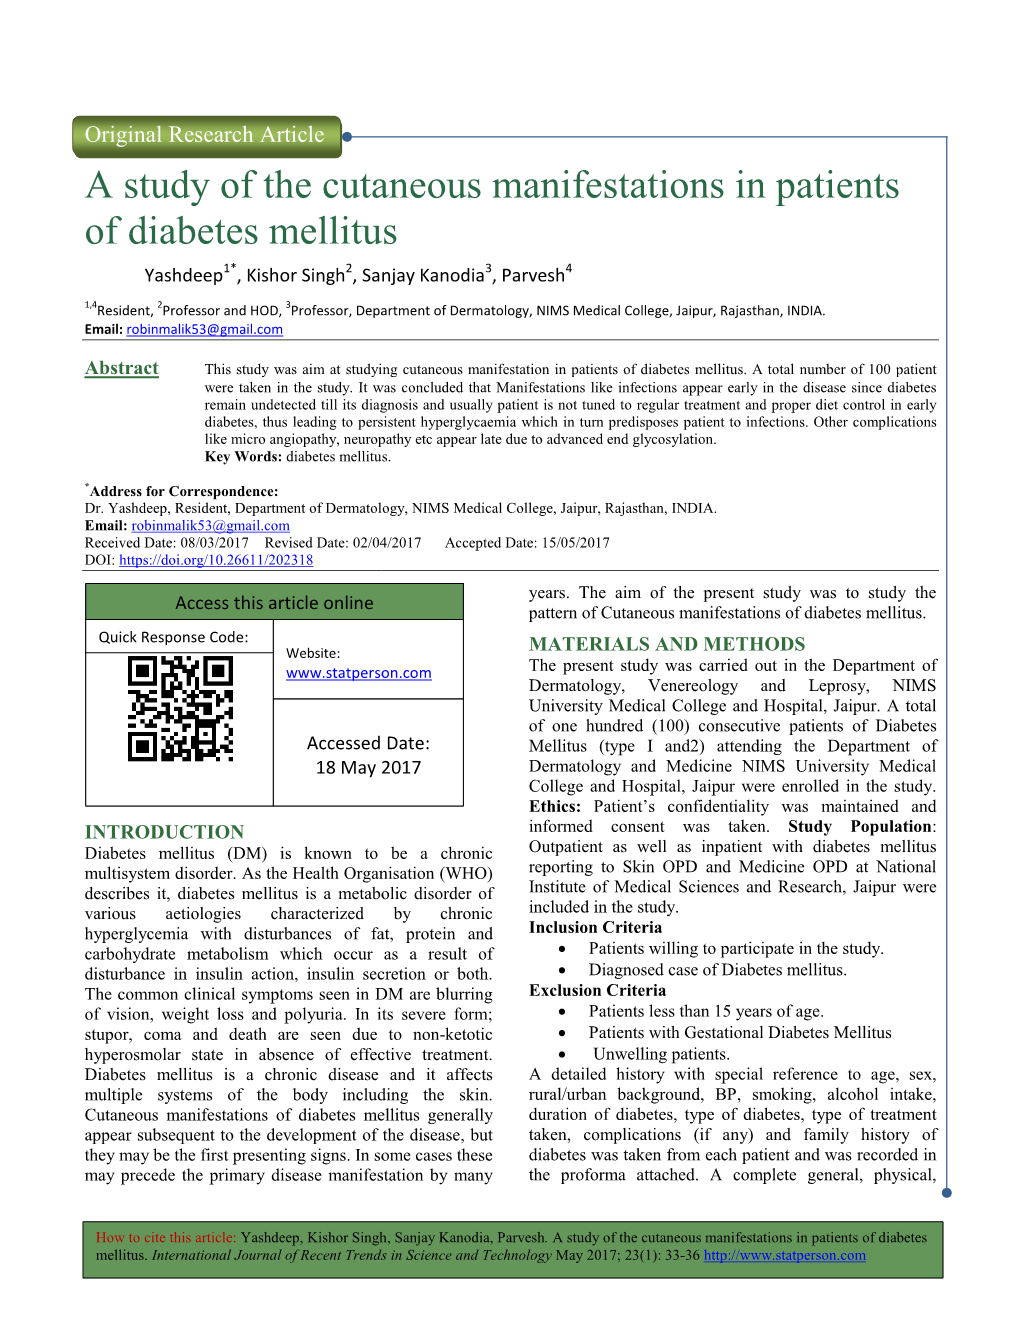 A Study of the Cutaneous Manif of Diabetes Mellitus Y of the Cutaneous